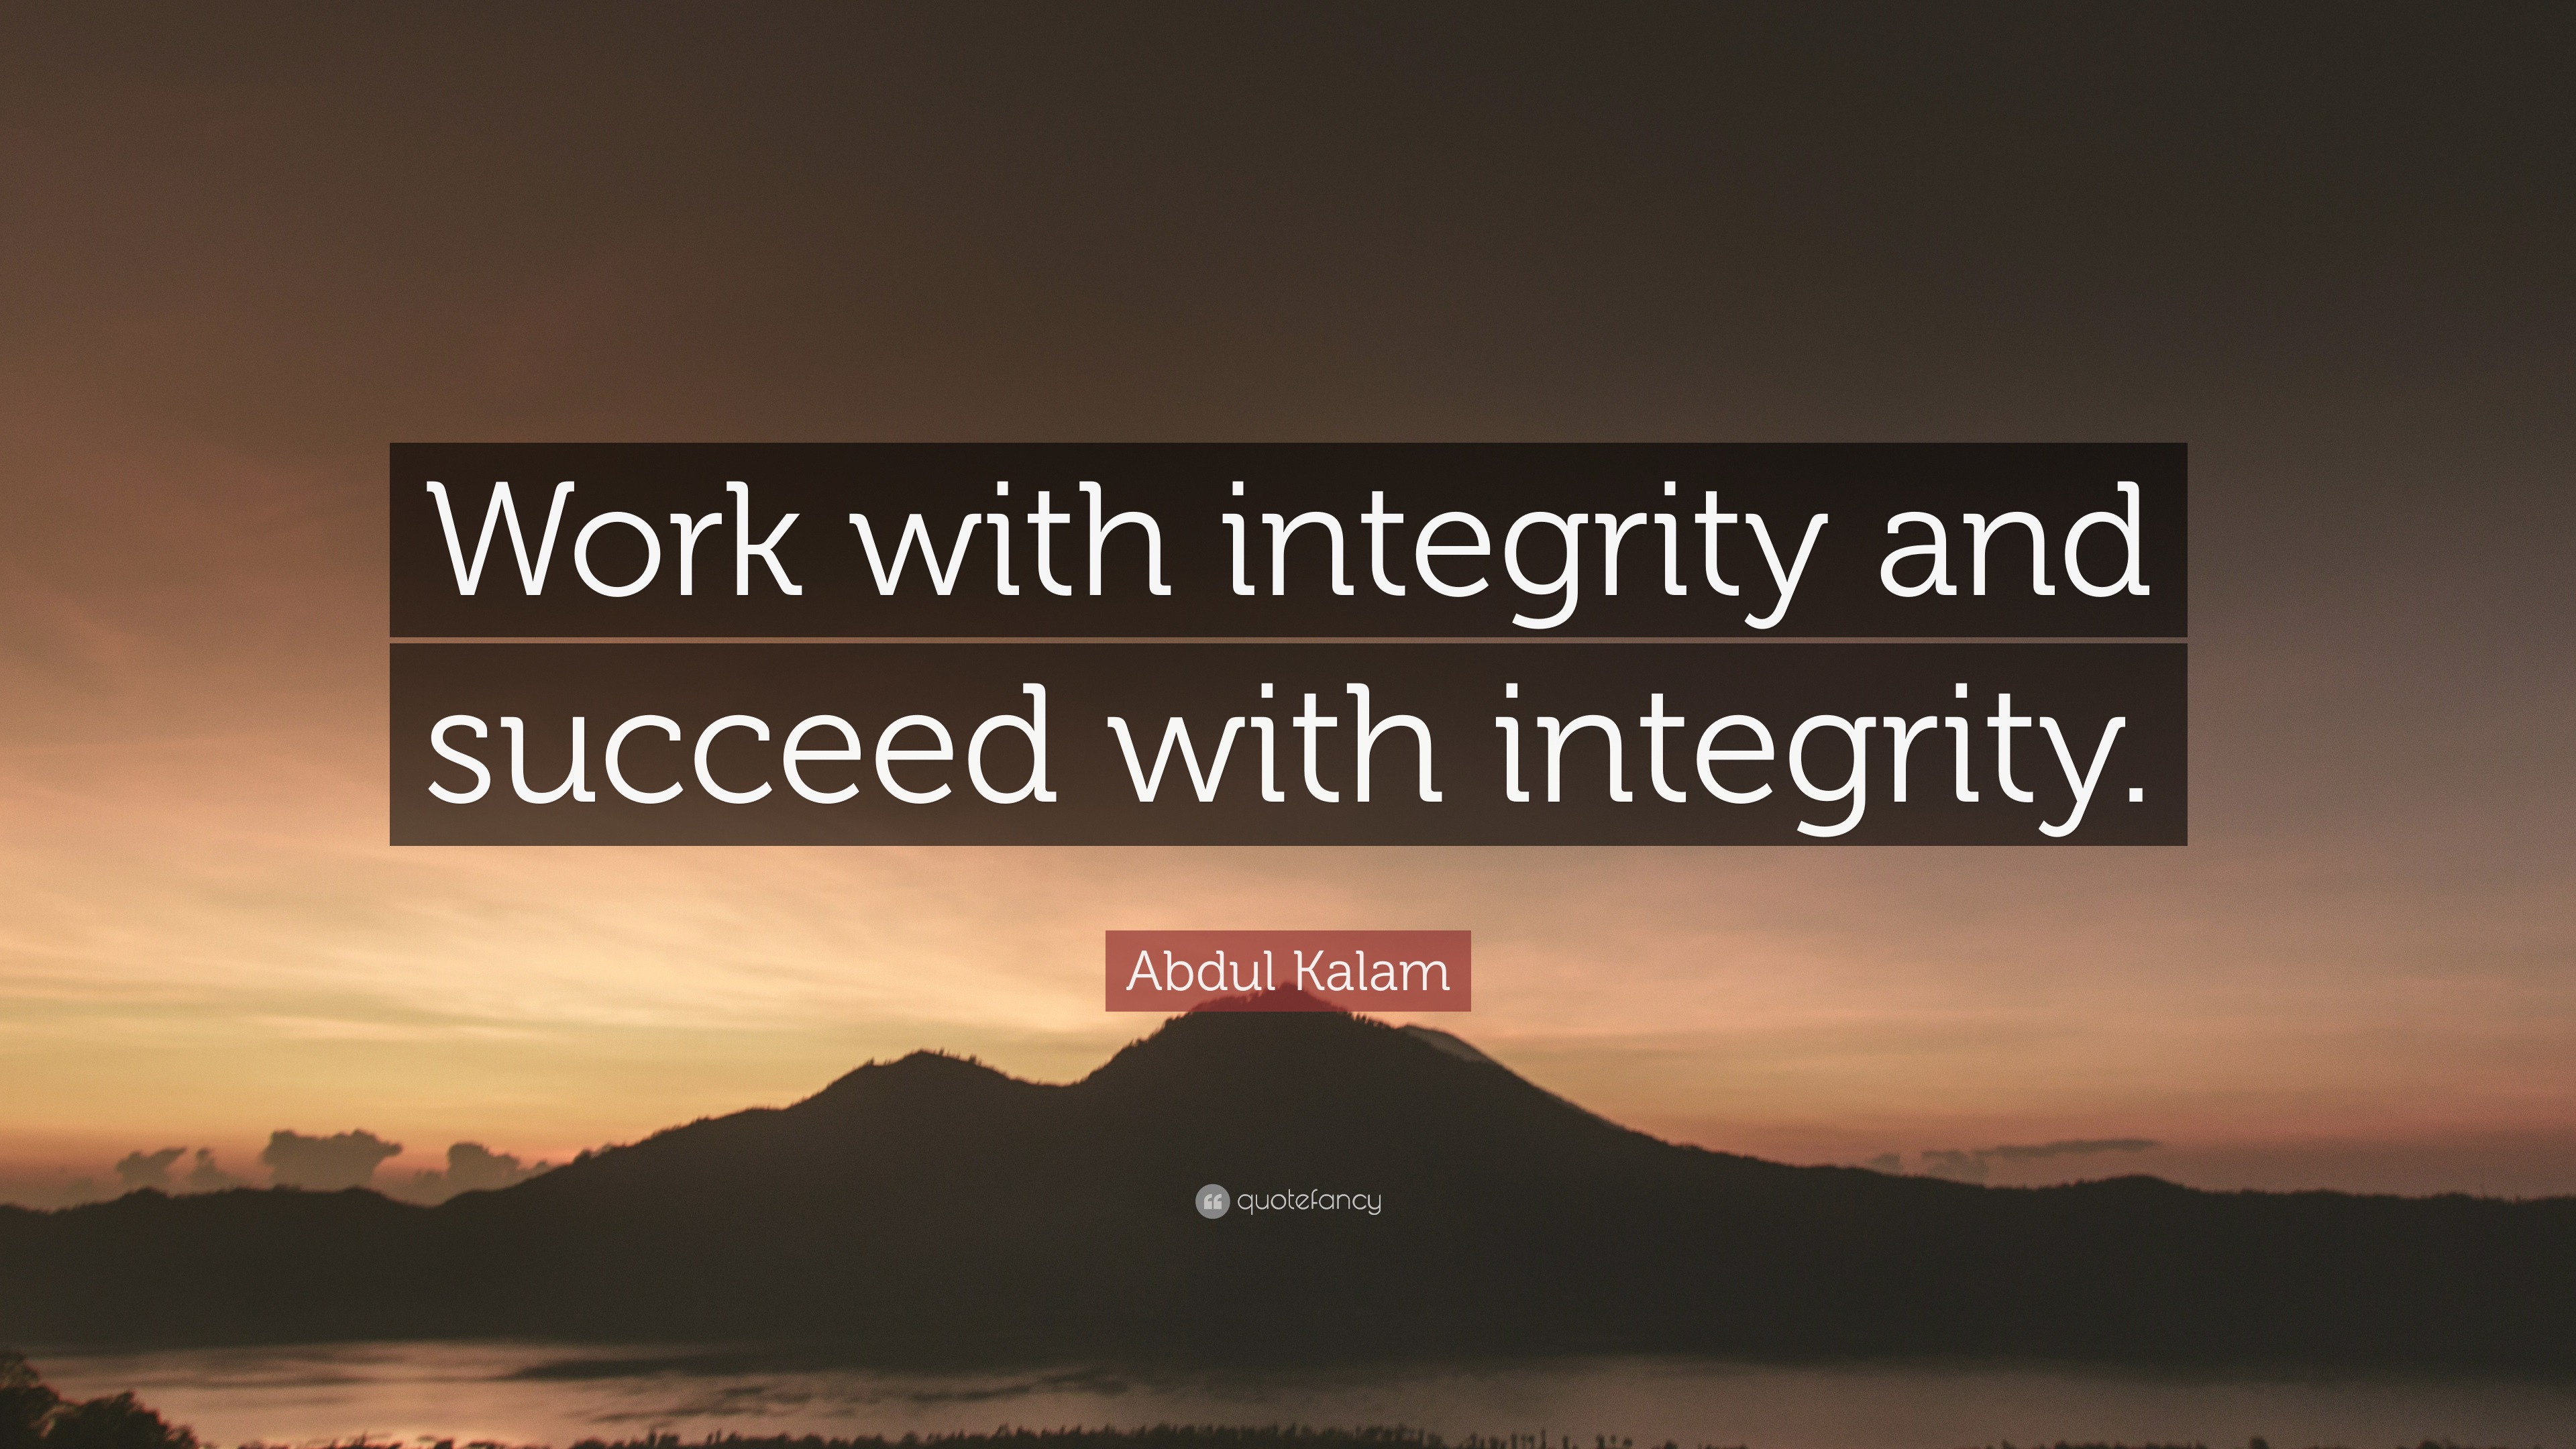 Abdul Kalam Quote: “Work with integrity and succeed with integrity.”